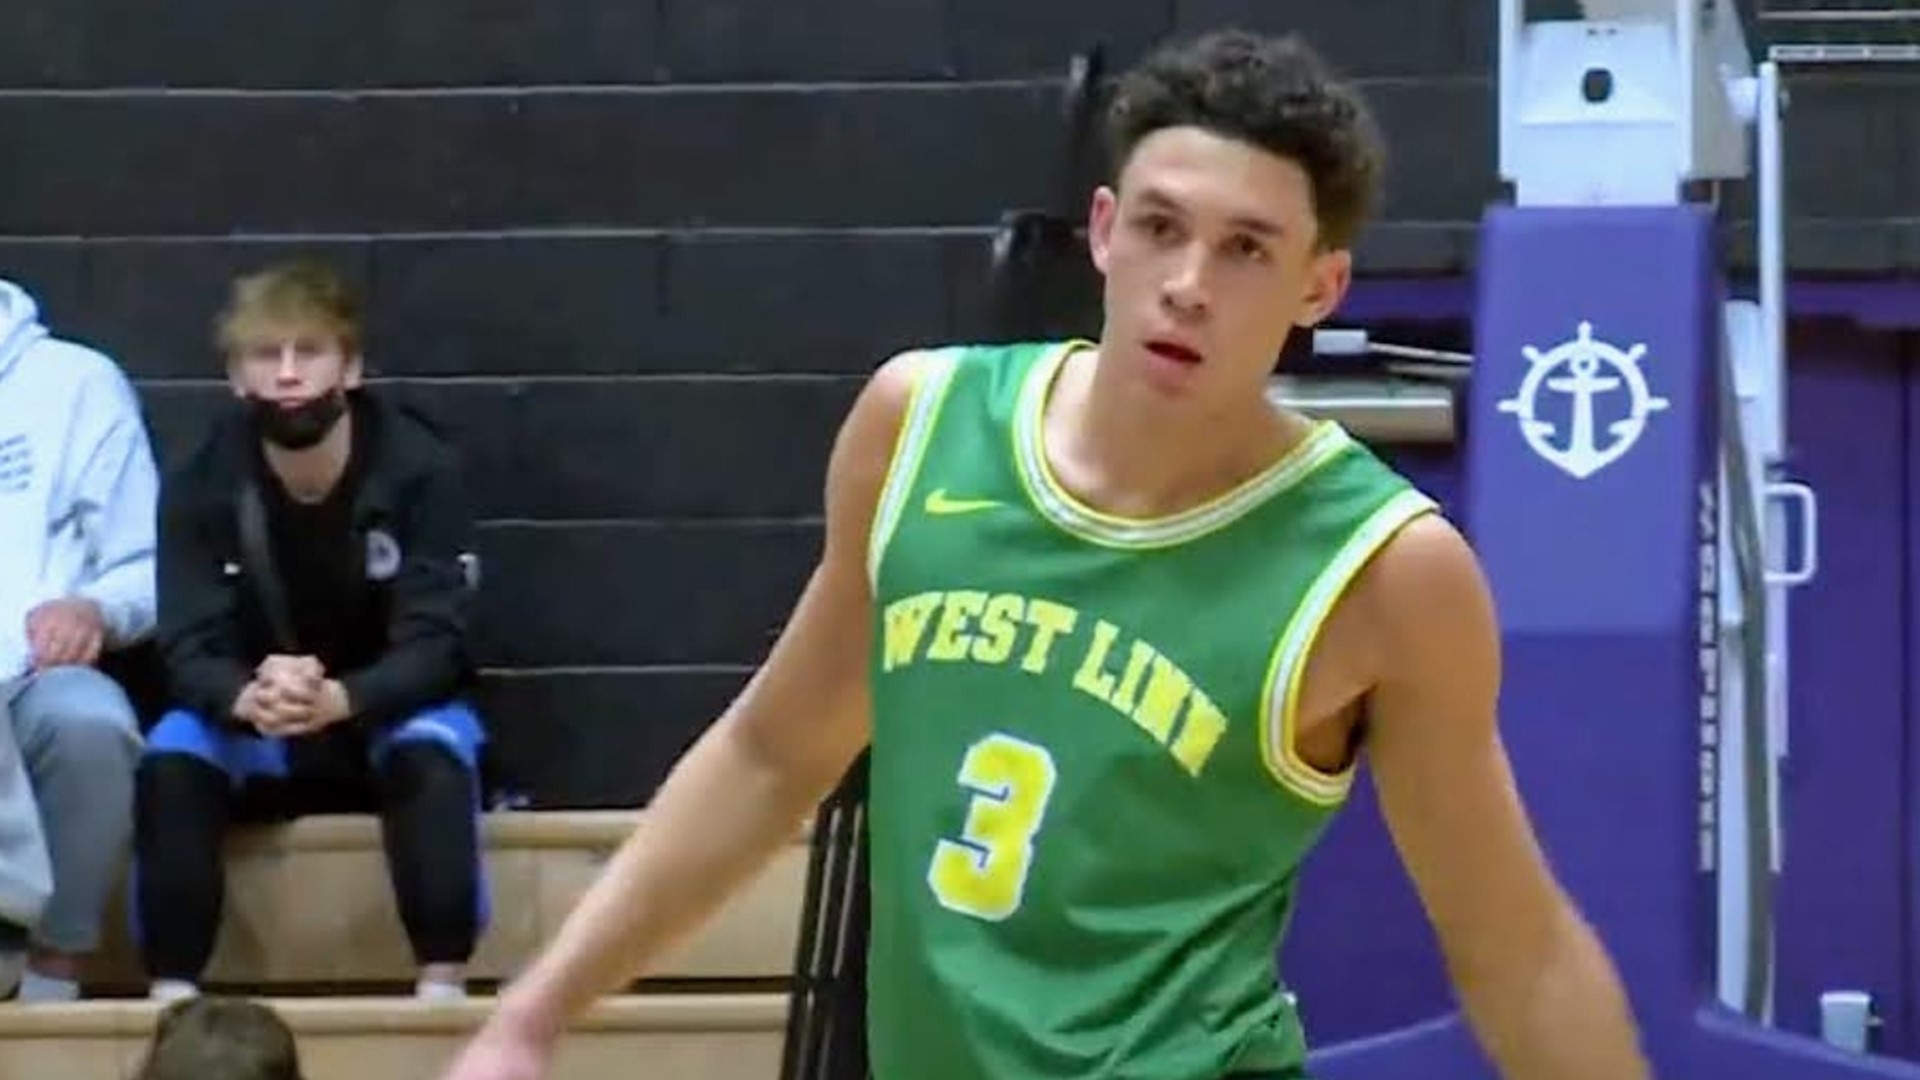 Jackson Shelstad was the Gatorade Player of the Year for Oregon as a junior. He's a 4-star recruit and the top rated player in the state for the class of 2023.